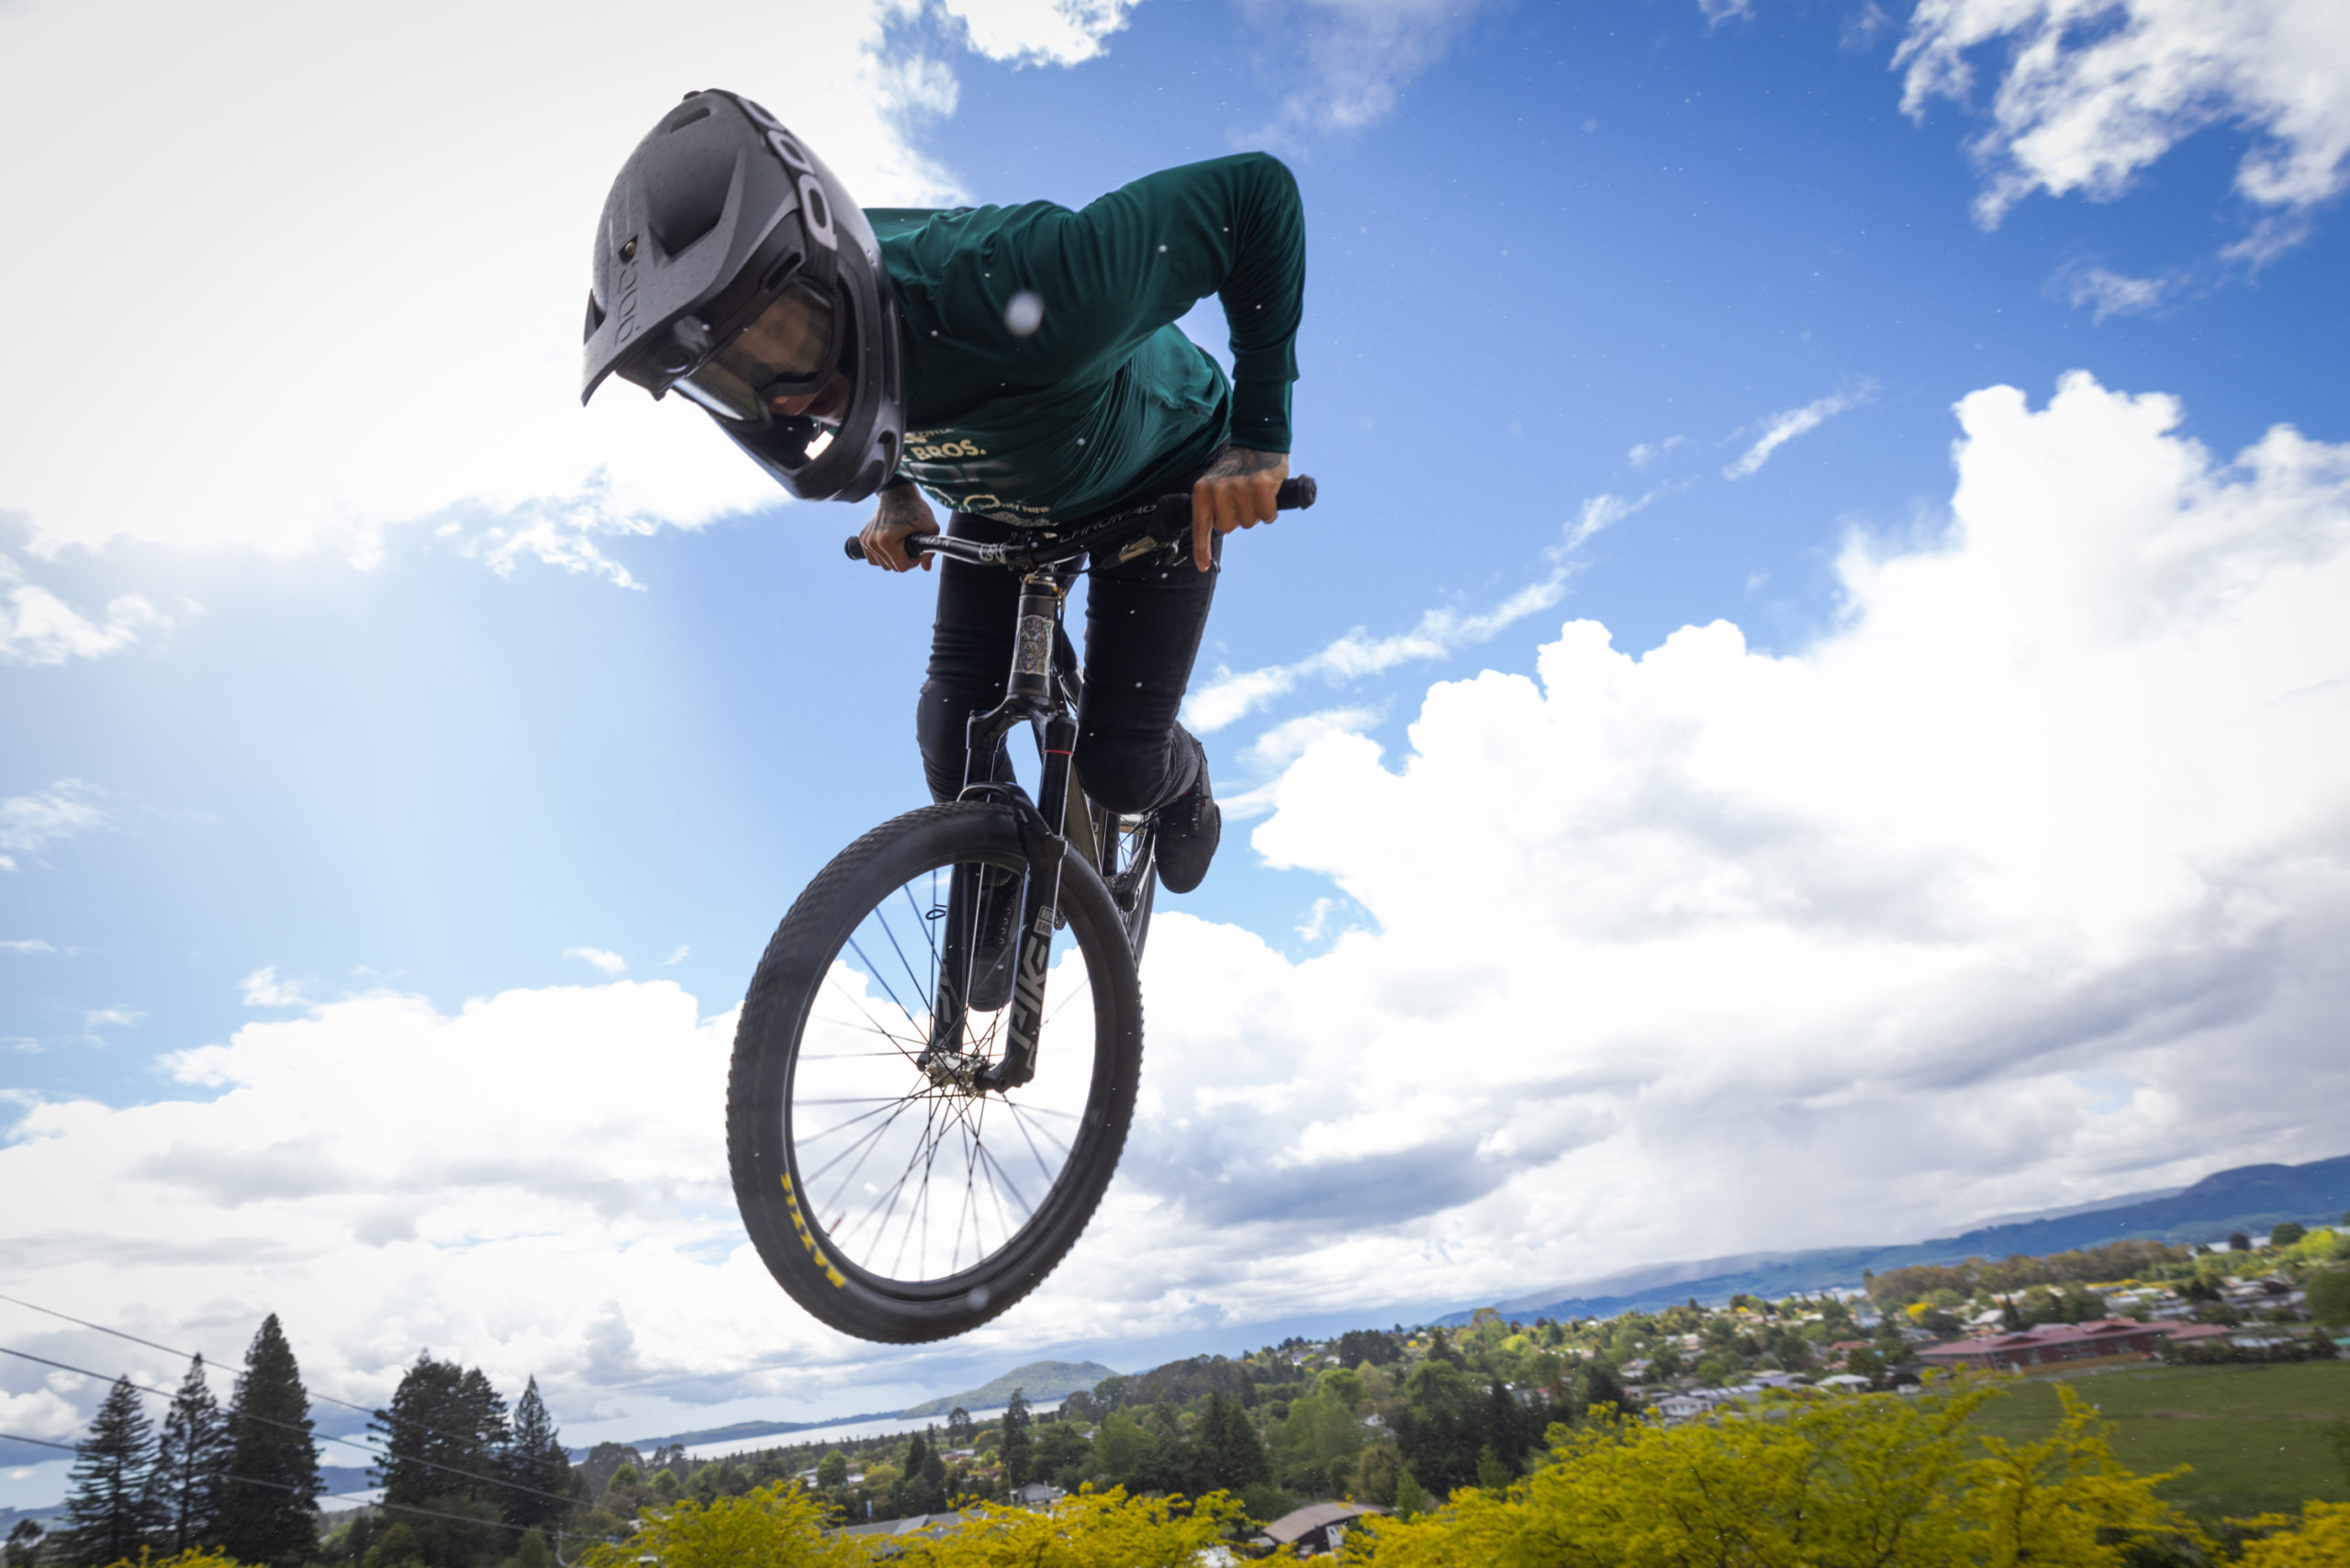 Slopestyle rider performing trick